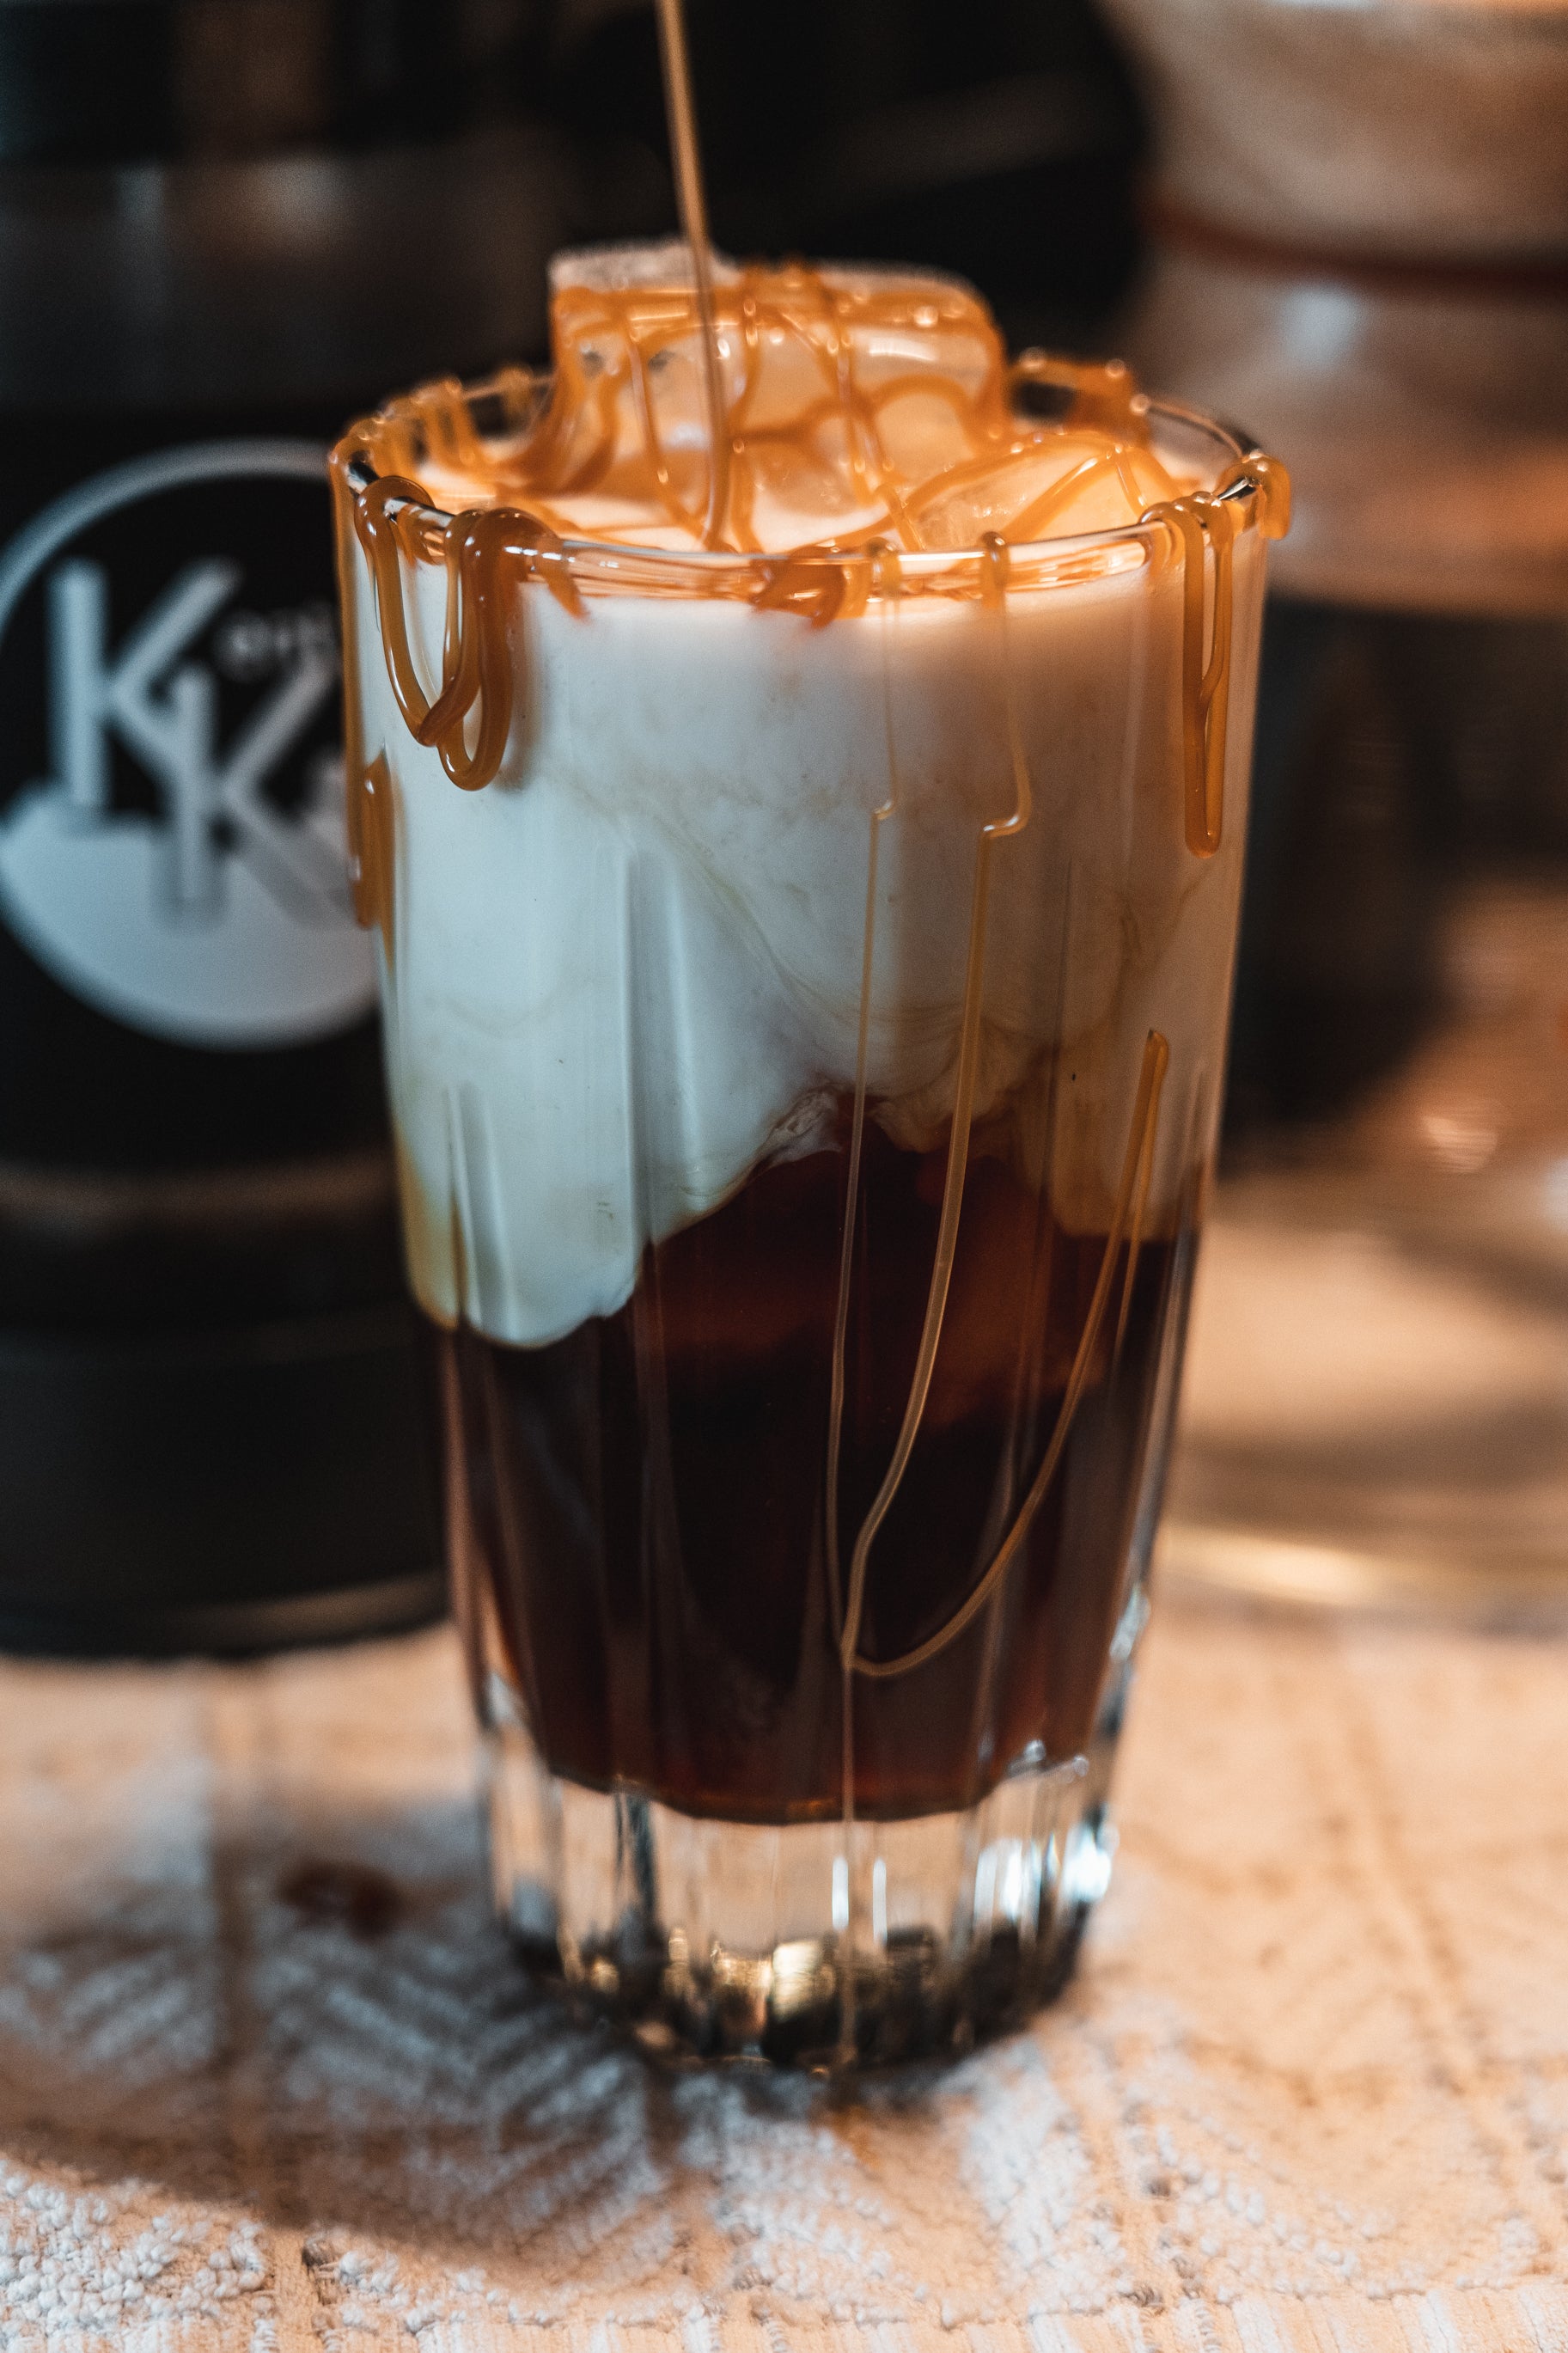 Pacific Crest cold brew koffee coffee caramel dripping iced coffee